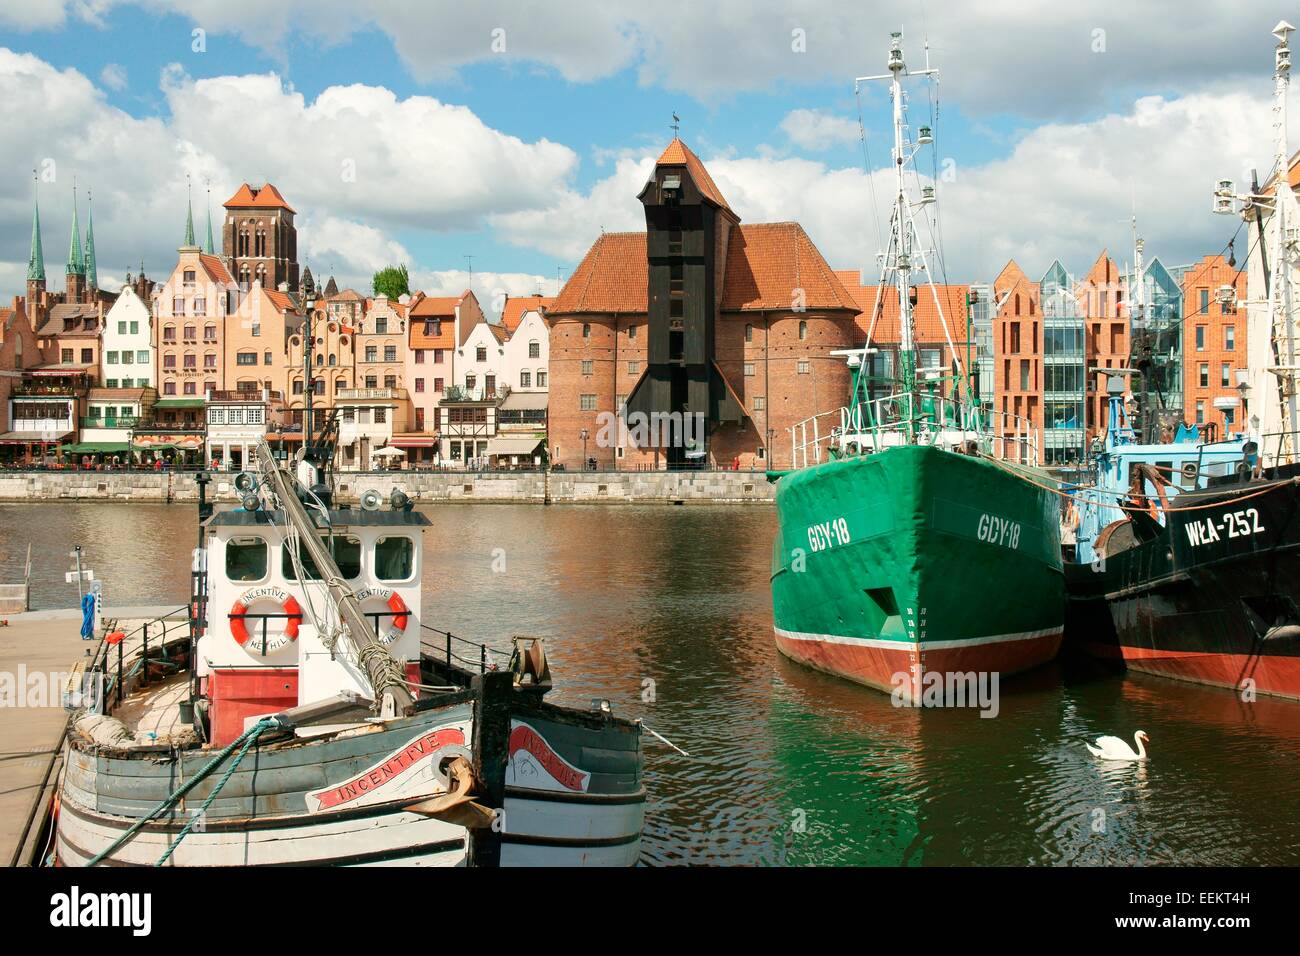 Gdansk Poland. Old Town. Fishing boats on the Motlawa River. Medieval Crane Gate and historic buildings on the Dlugie Pobrzeze Stock Photo